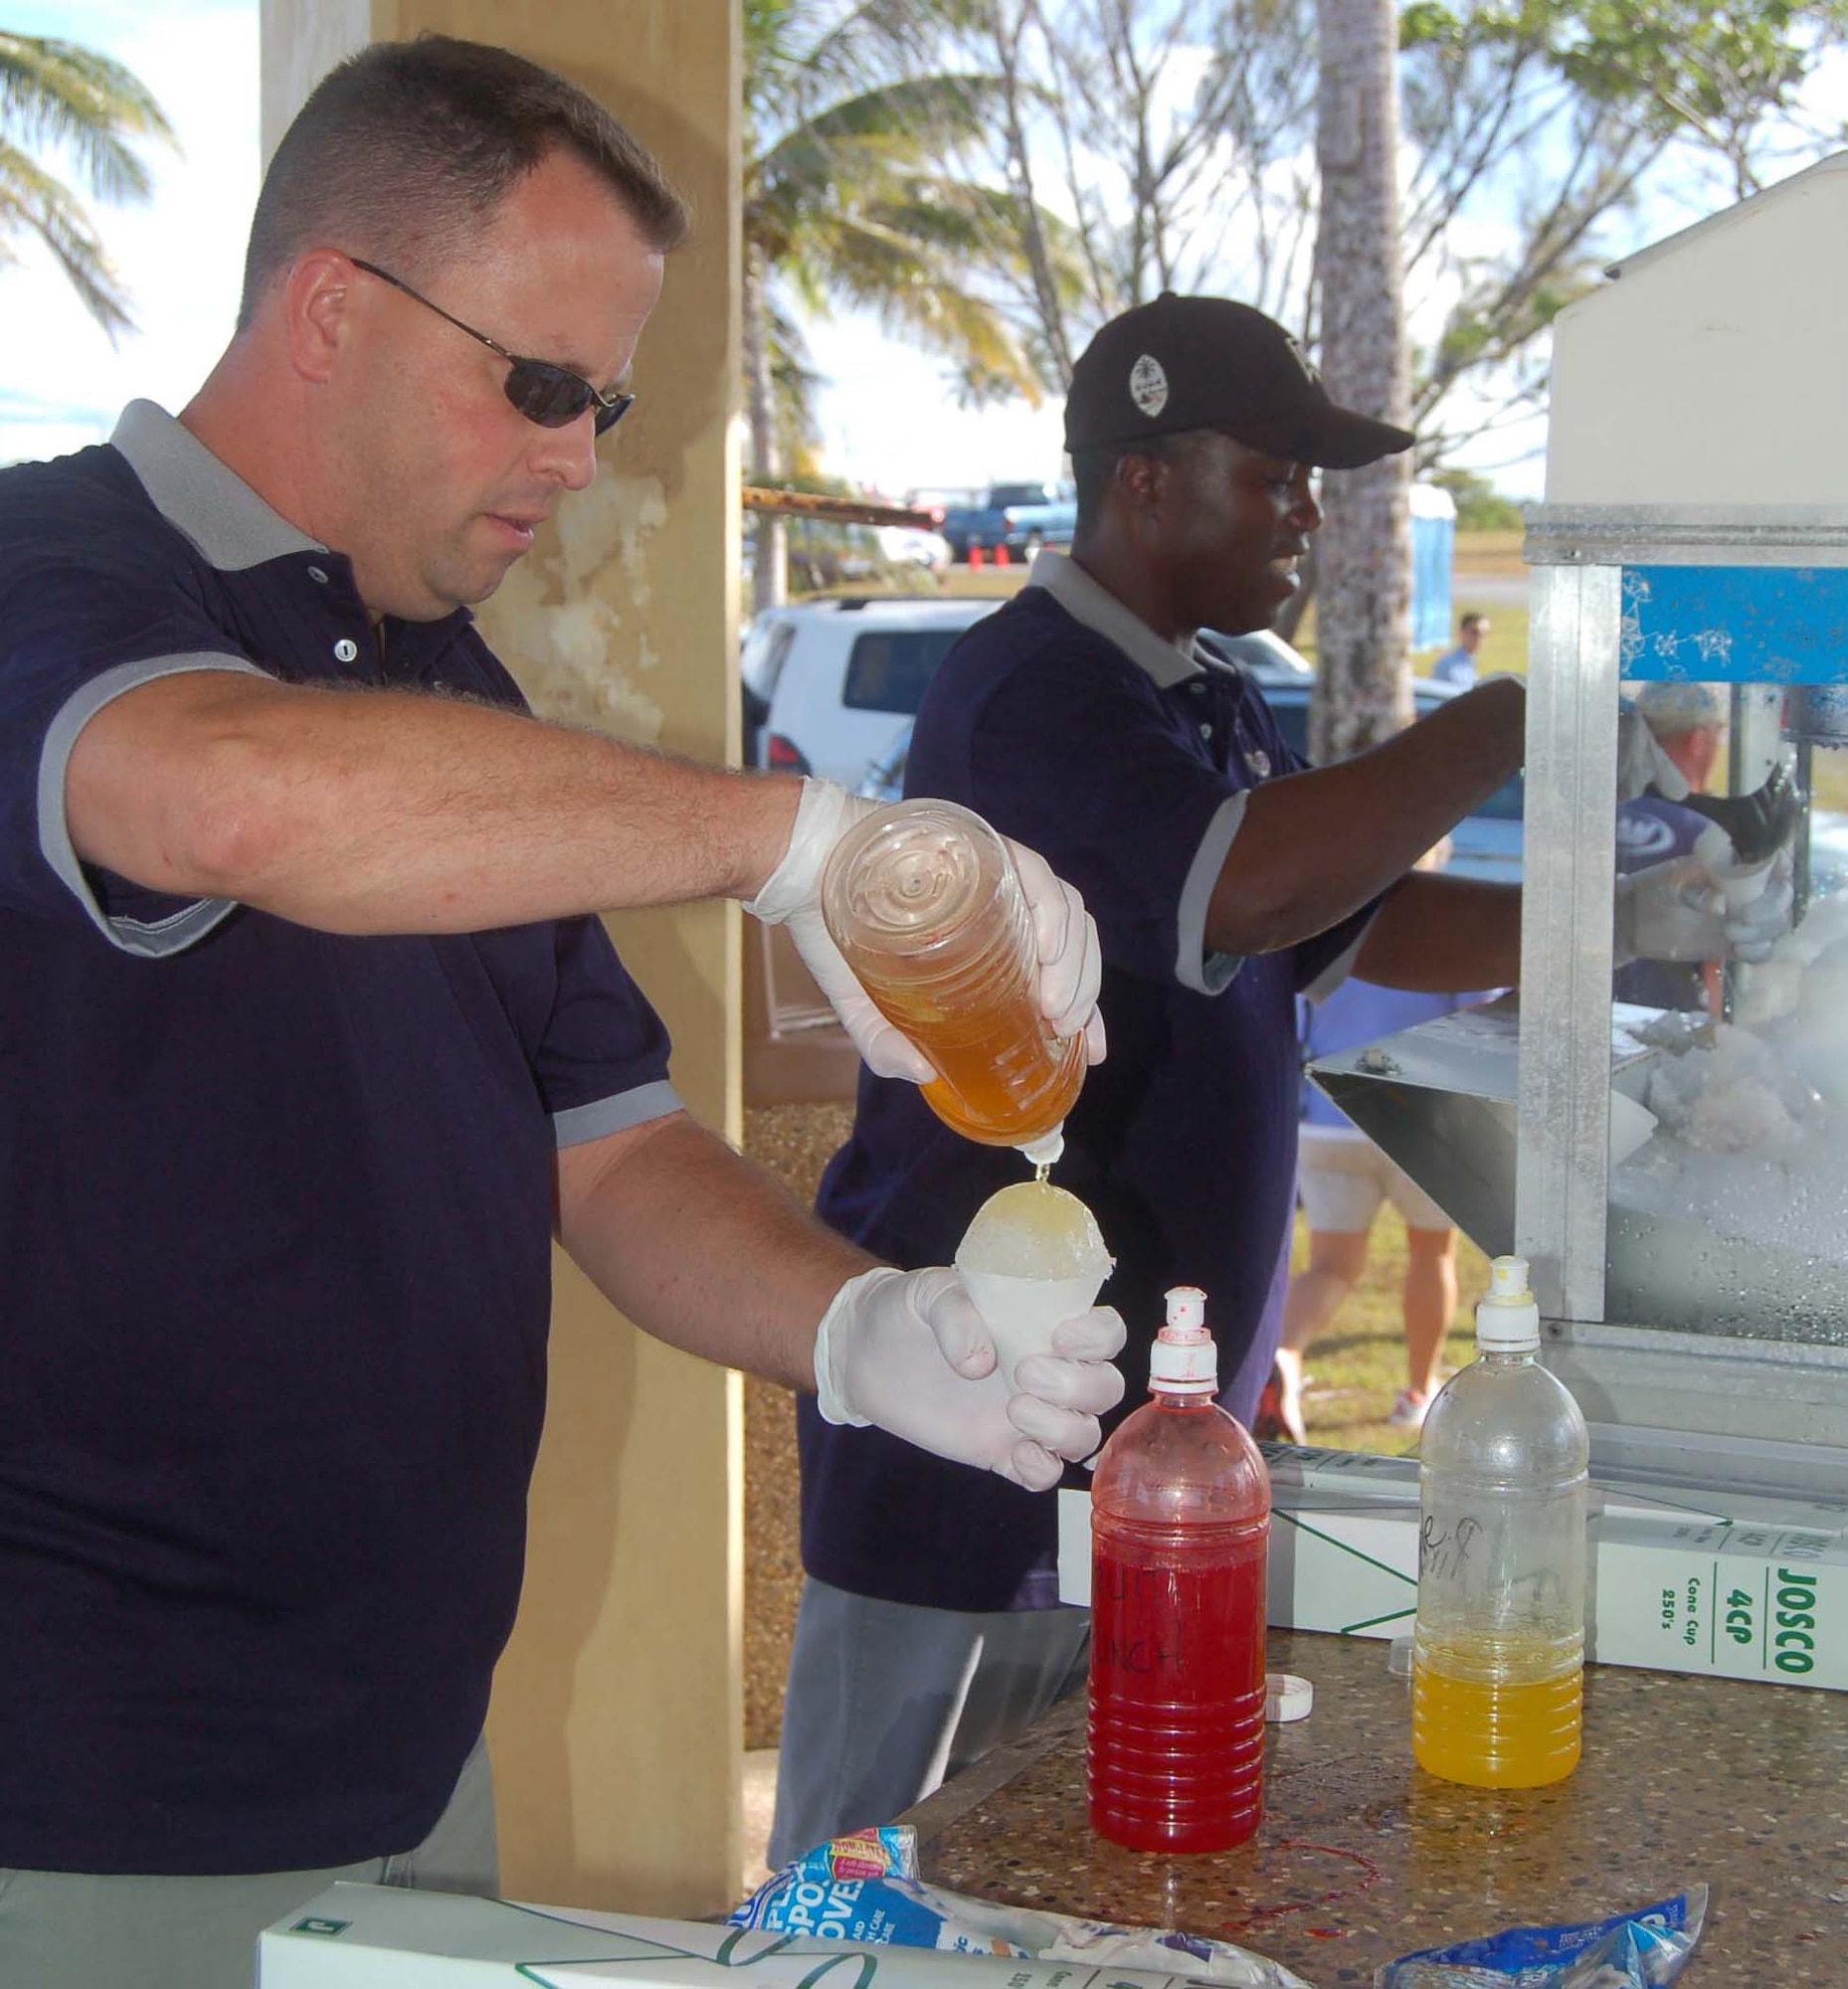 (From left) Master Sgt. Wes Willand and Master Sgt. Fenton Fitzgerald, from the Air Force Sergeant's Association chapter 1560, serve snow cones at Andersen's annual Freedom Fest. (U.S. Air Force Photo/AIrman 1st Class Carissa Morgan)